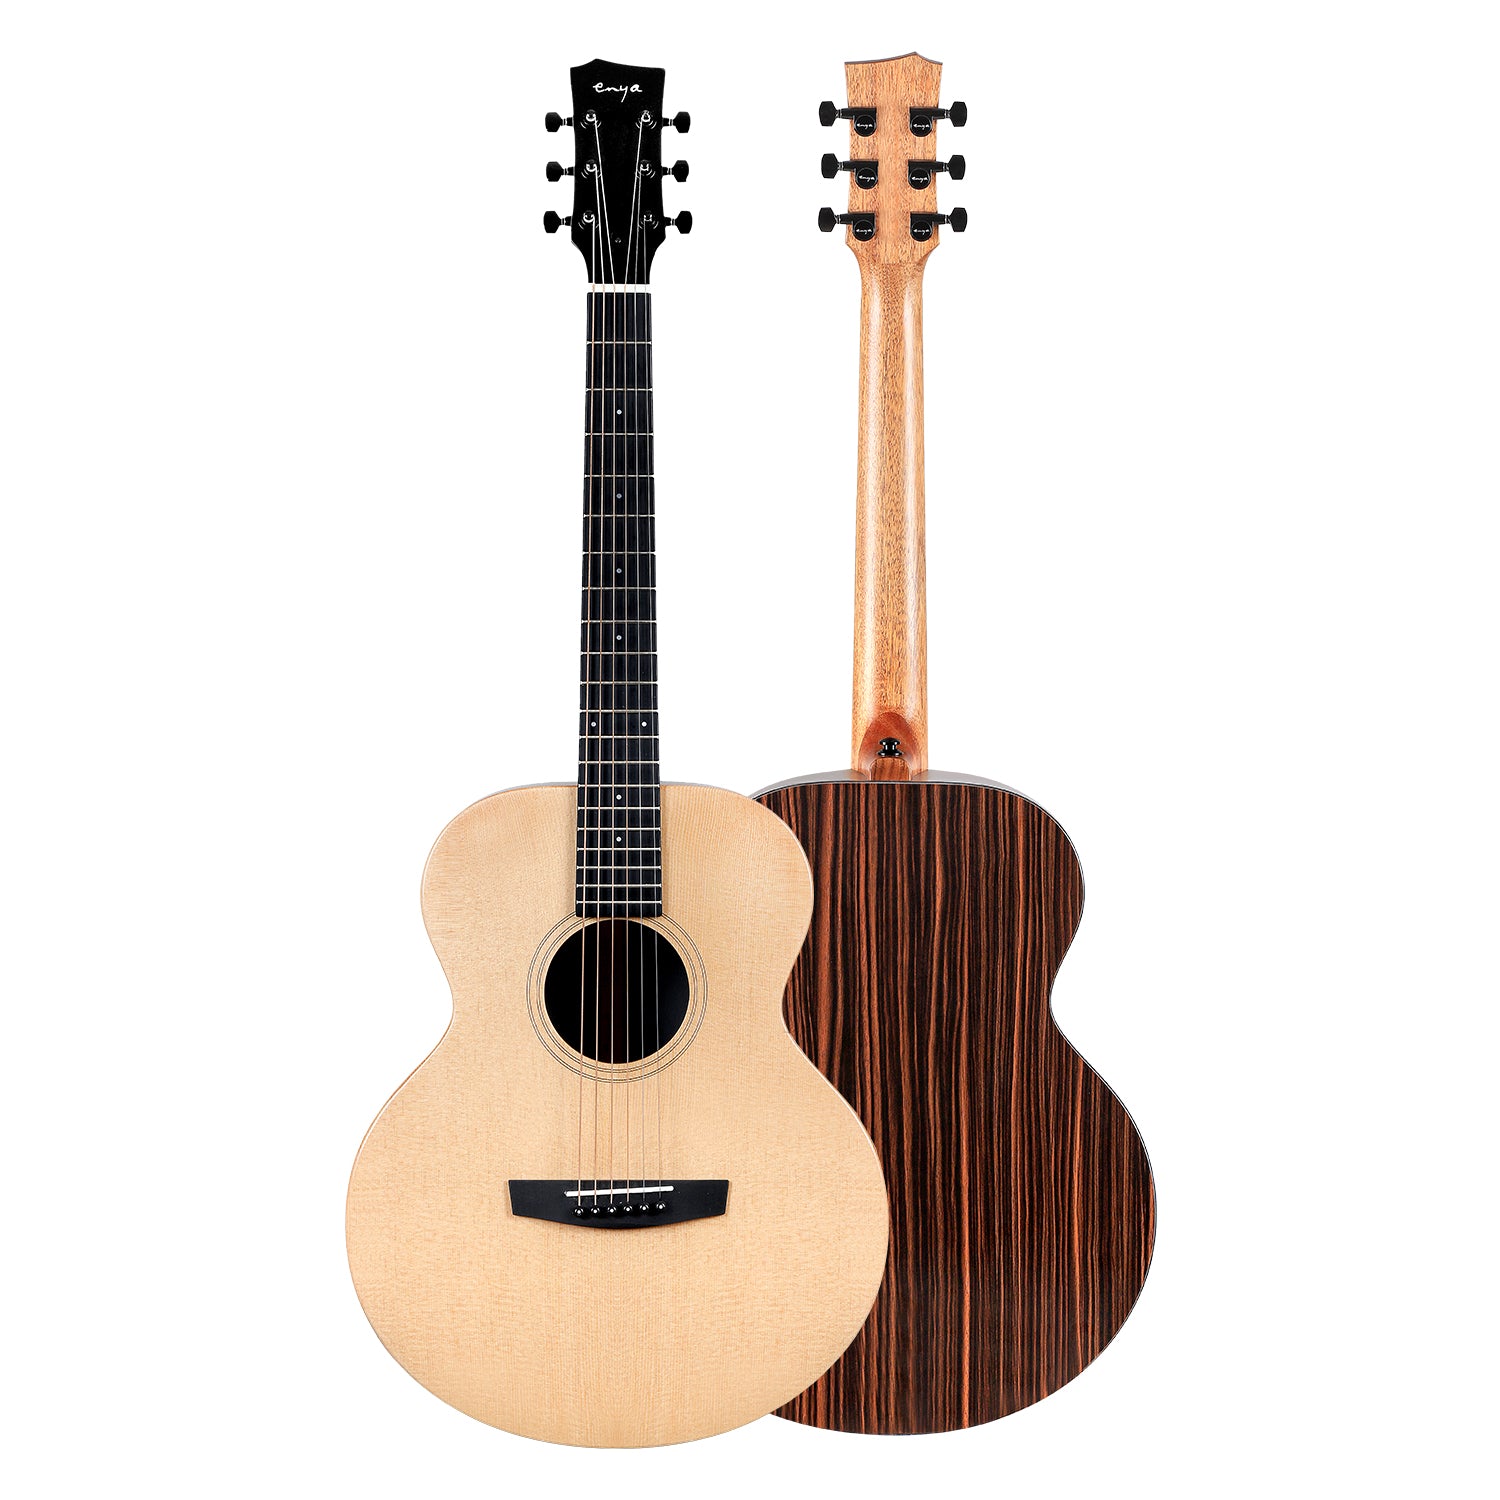 Enya EM-X1 Pro 36" HPL Acoustic Guitar With Bag And Accessories | ENYA , Zoso Music